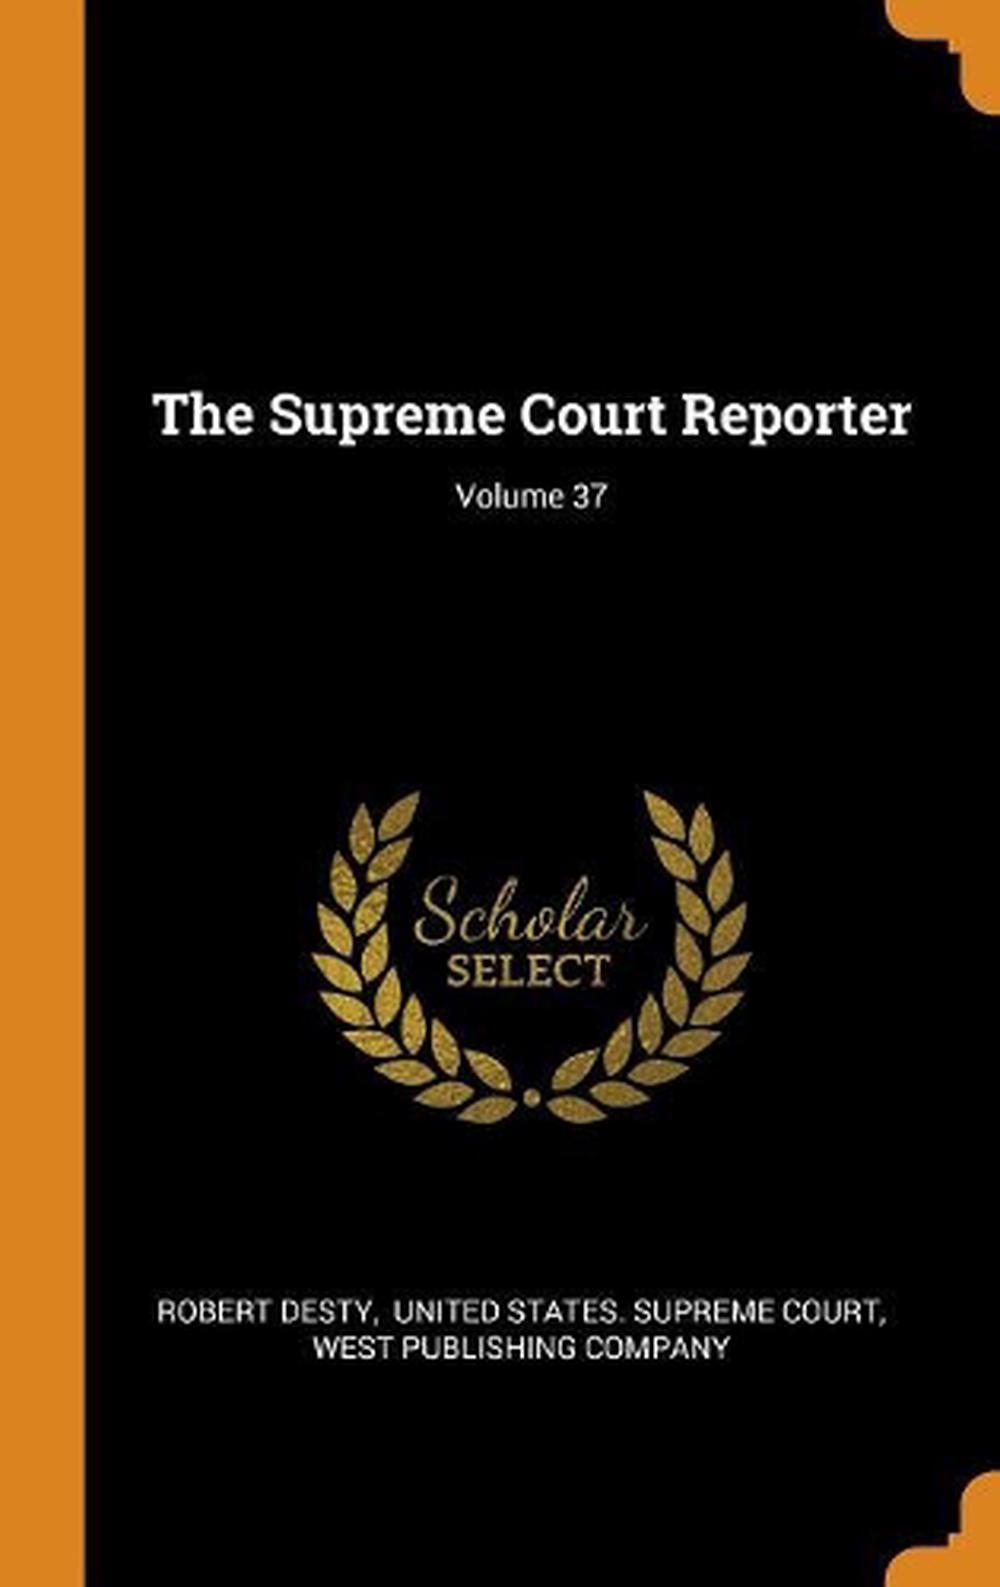 Supreme Court Reporter Volume 37 by Robert Desty (English) Hardcover